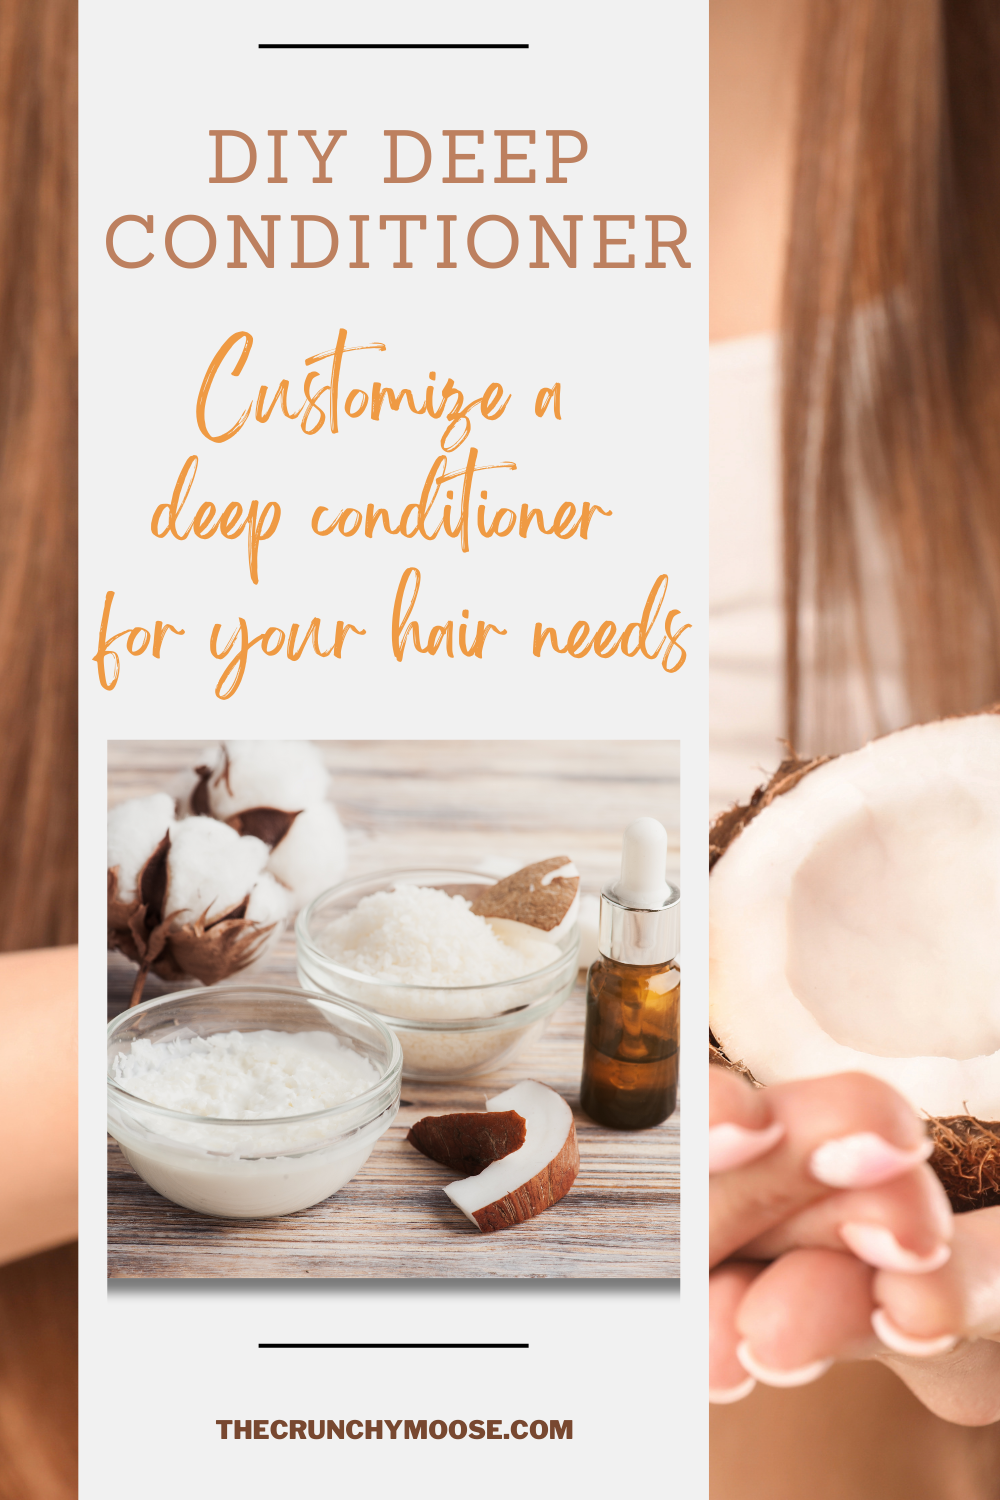 diy deep conditioners with natural ingredients